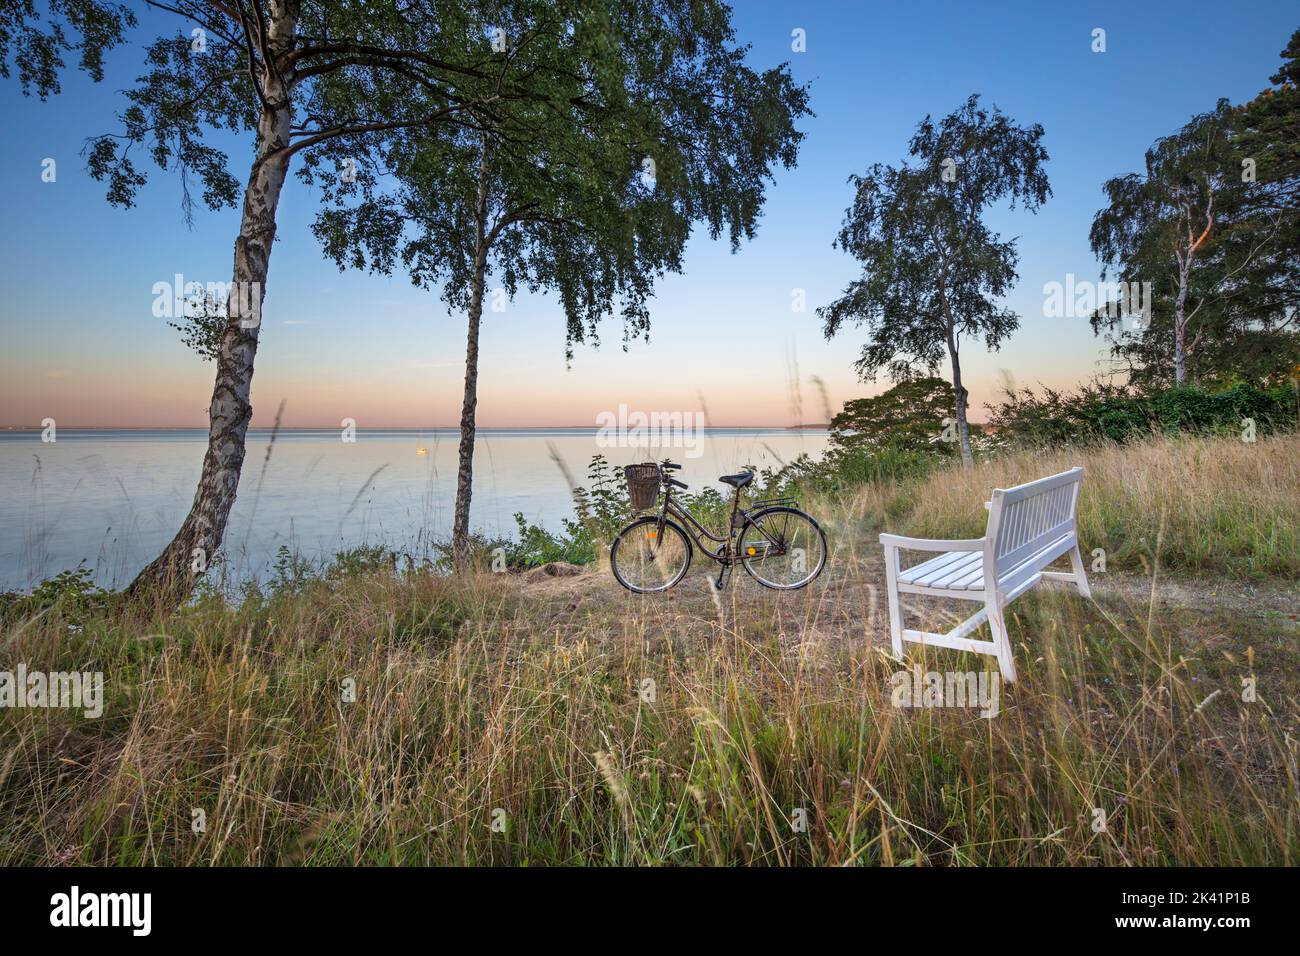 White wooden bench and bicycle below silver birch trees overlooking the sea at dusk, Munkerup, Zealand, Denmark, Europe Stock Photo